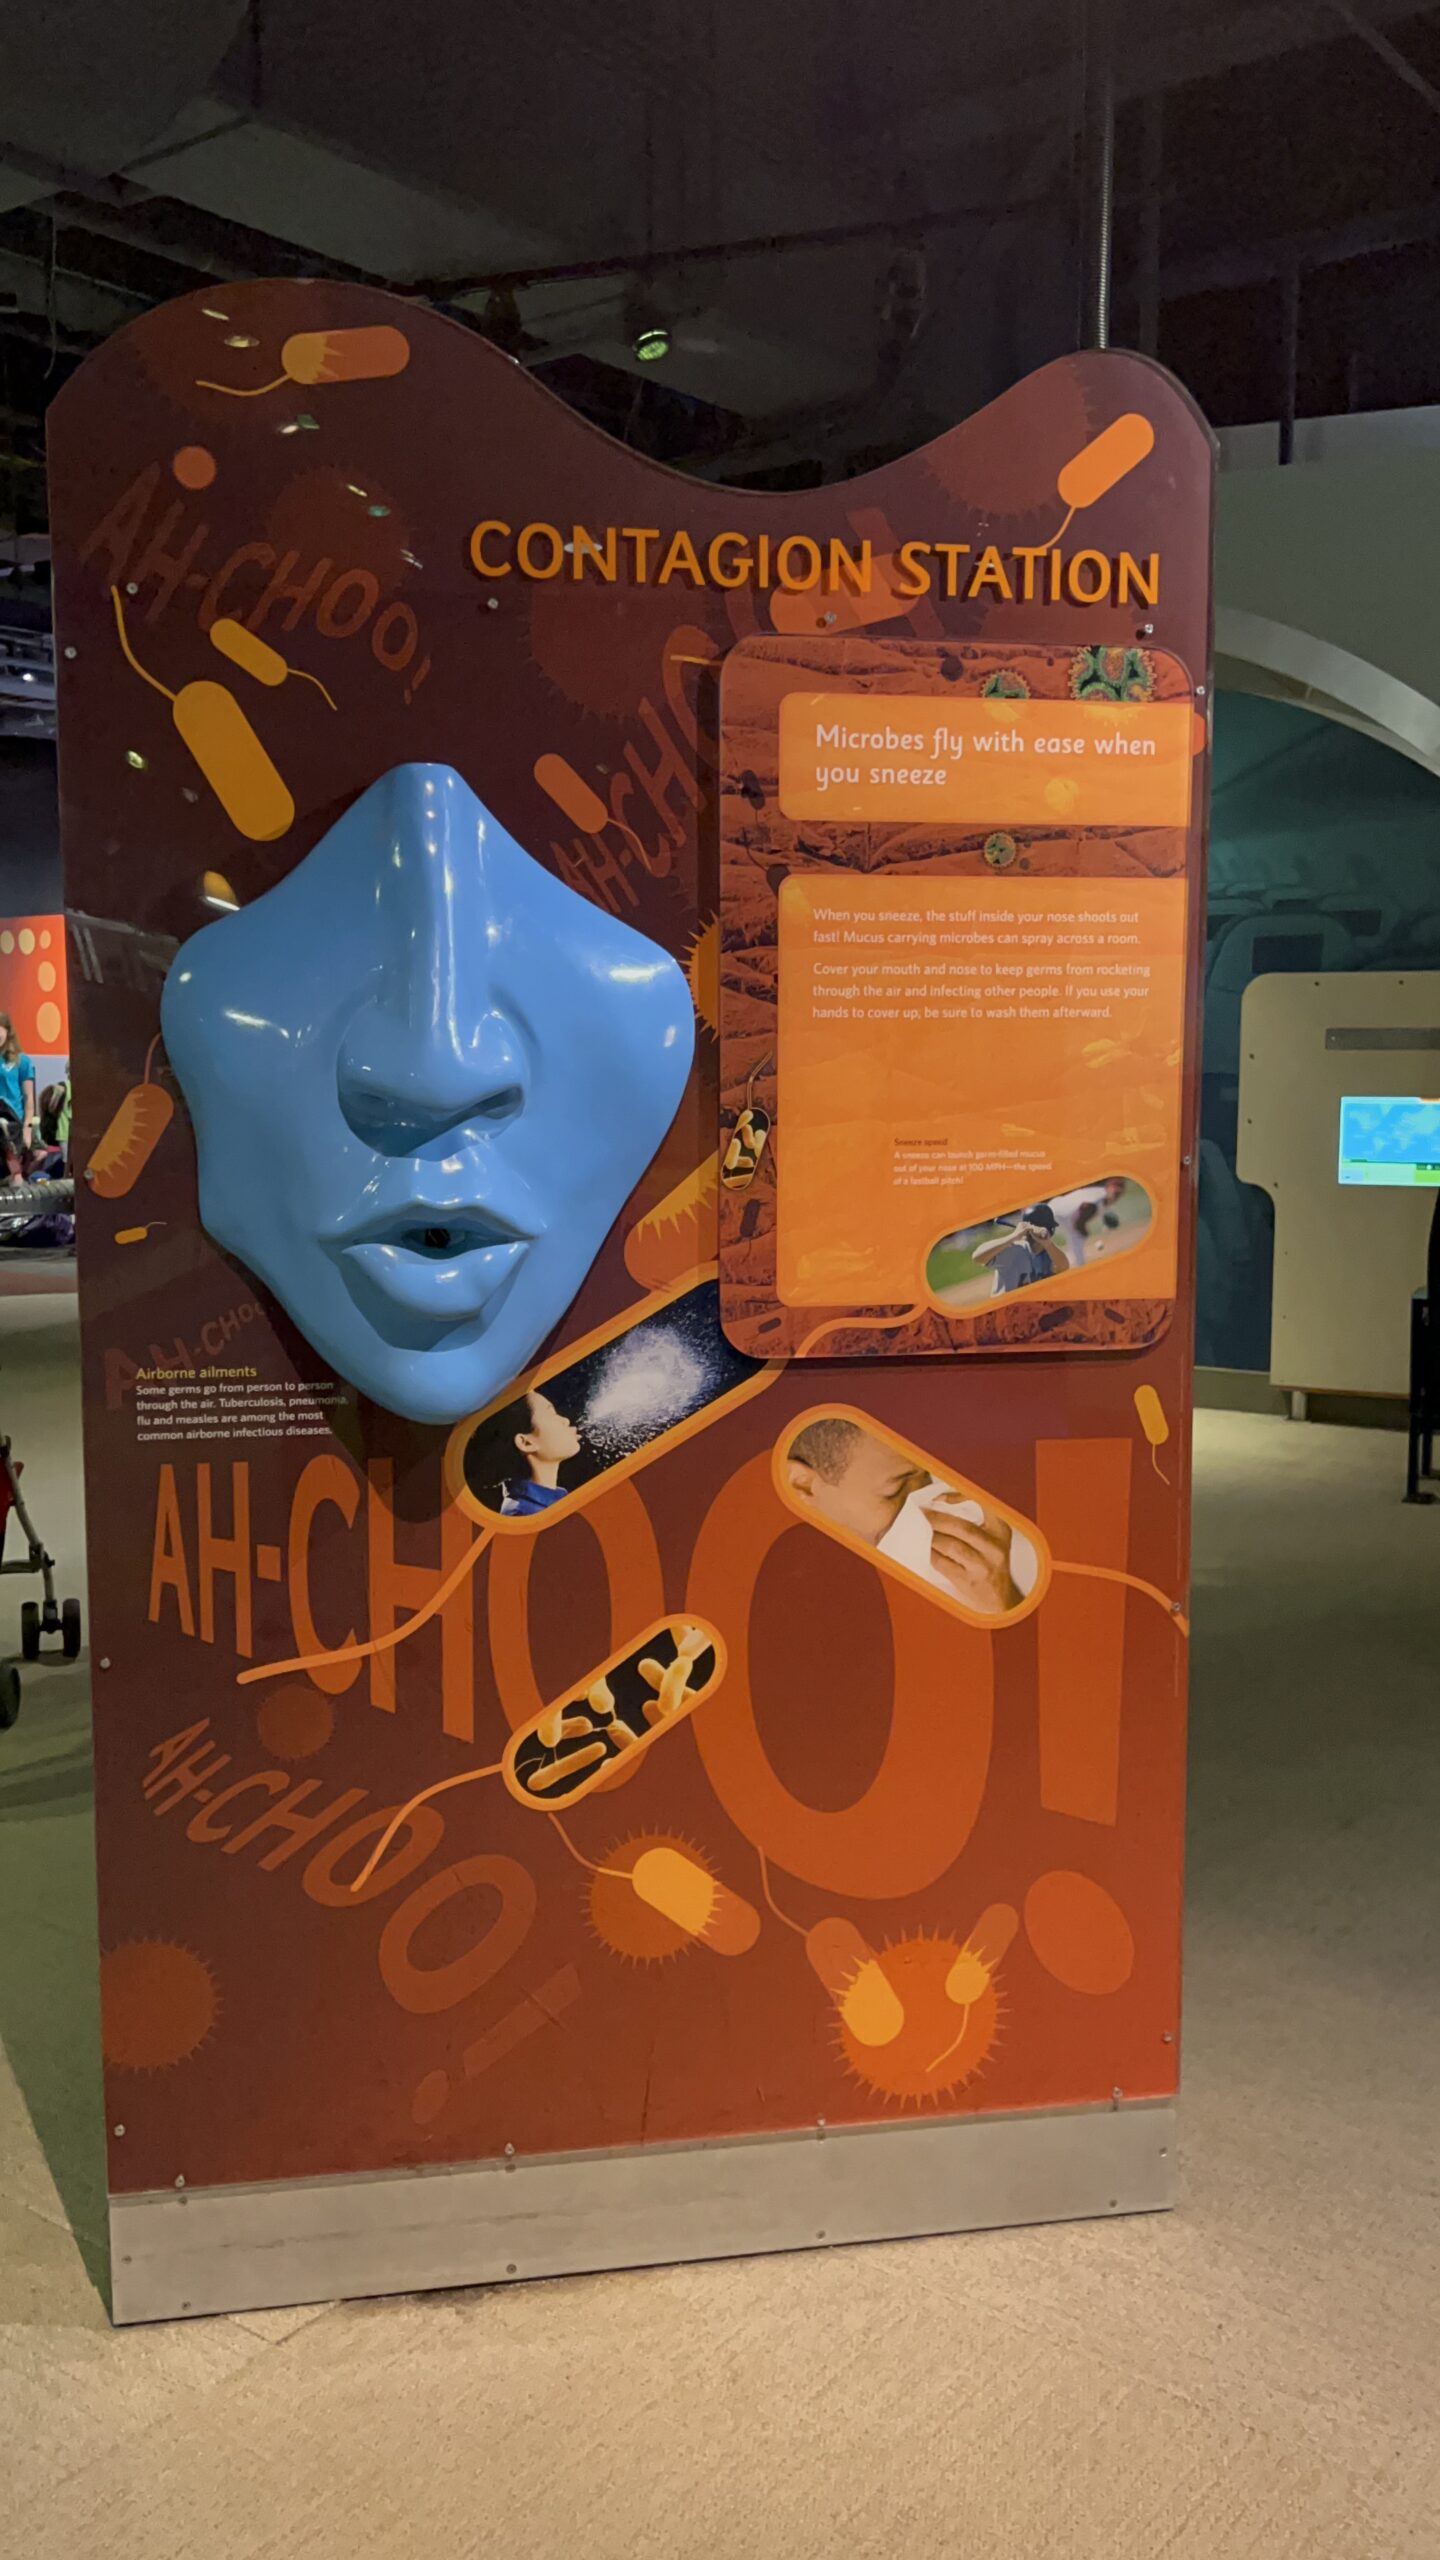 The Contagion Station in Microbes Rule at the Liberty Science Center in Jersey City NJ